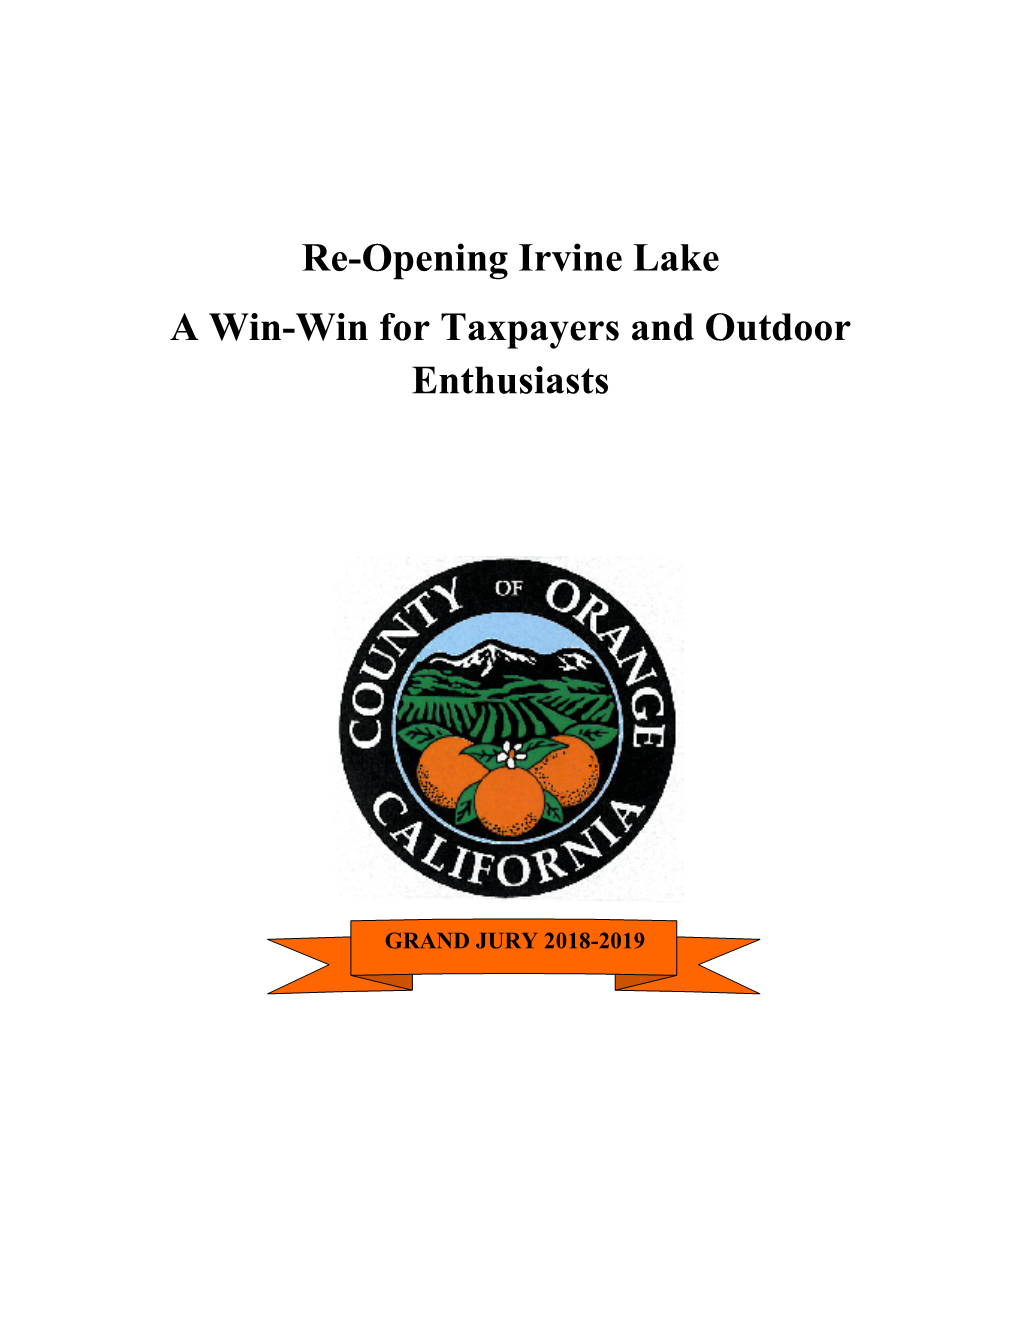 Re-Opening Irvine Lake a Win-Win for Taxpayers and Outdoor Enthusiasts